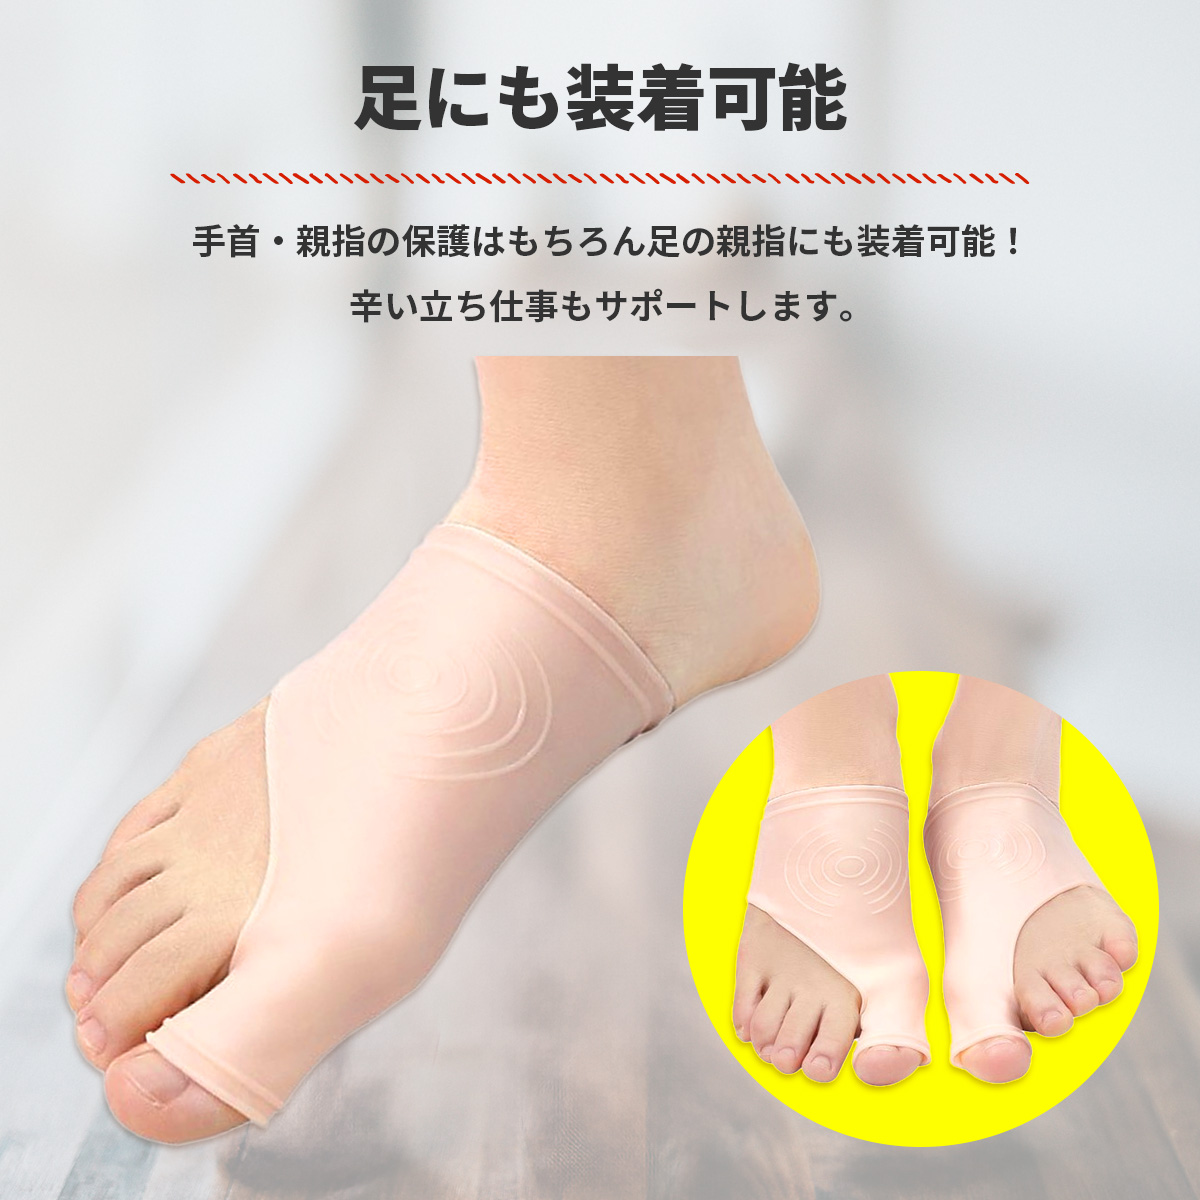 . scabbard . supporter 2 set 4 sheets insertion silicon parent finger wrist waterproof parent finger supporter pain protection washing with water possibility height . put on hand spring finger fixation parent finger. attaching root . pain .